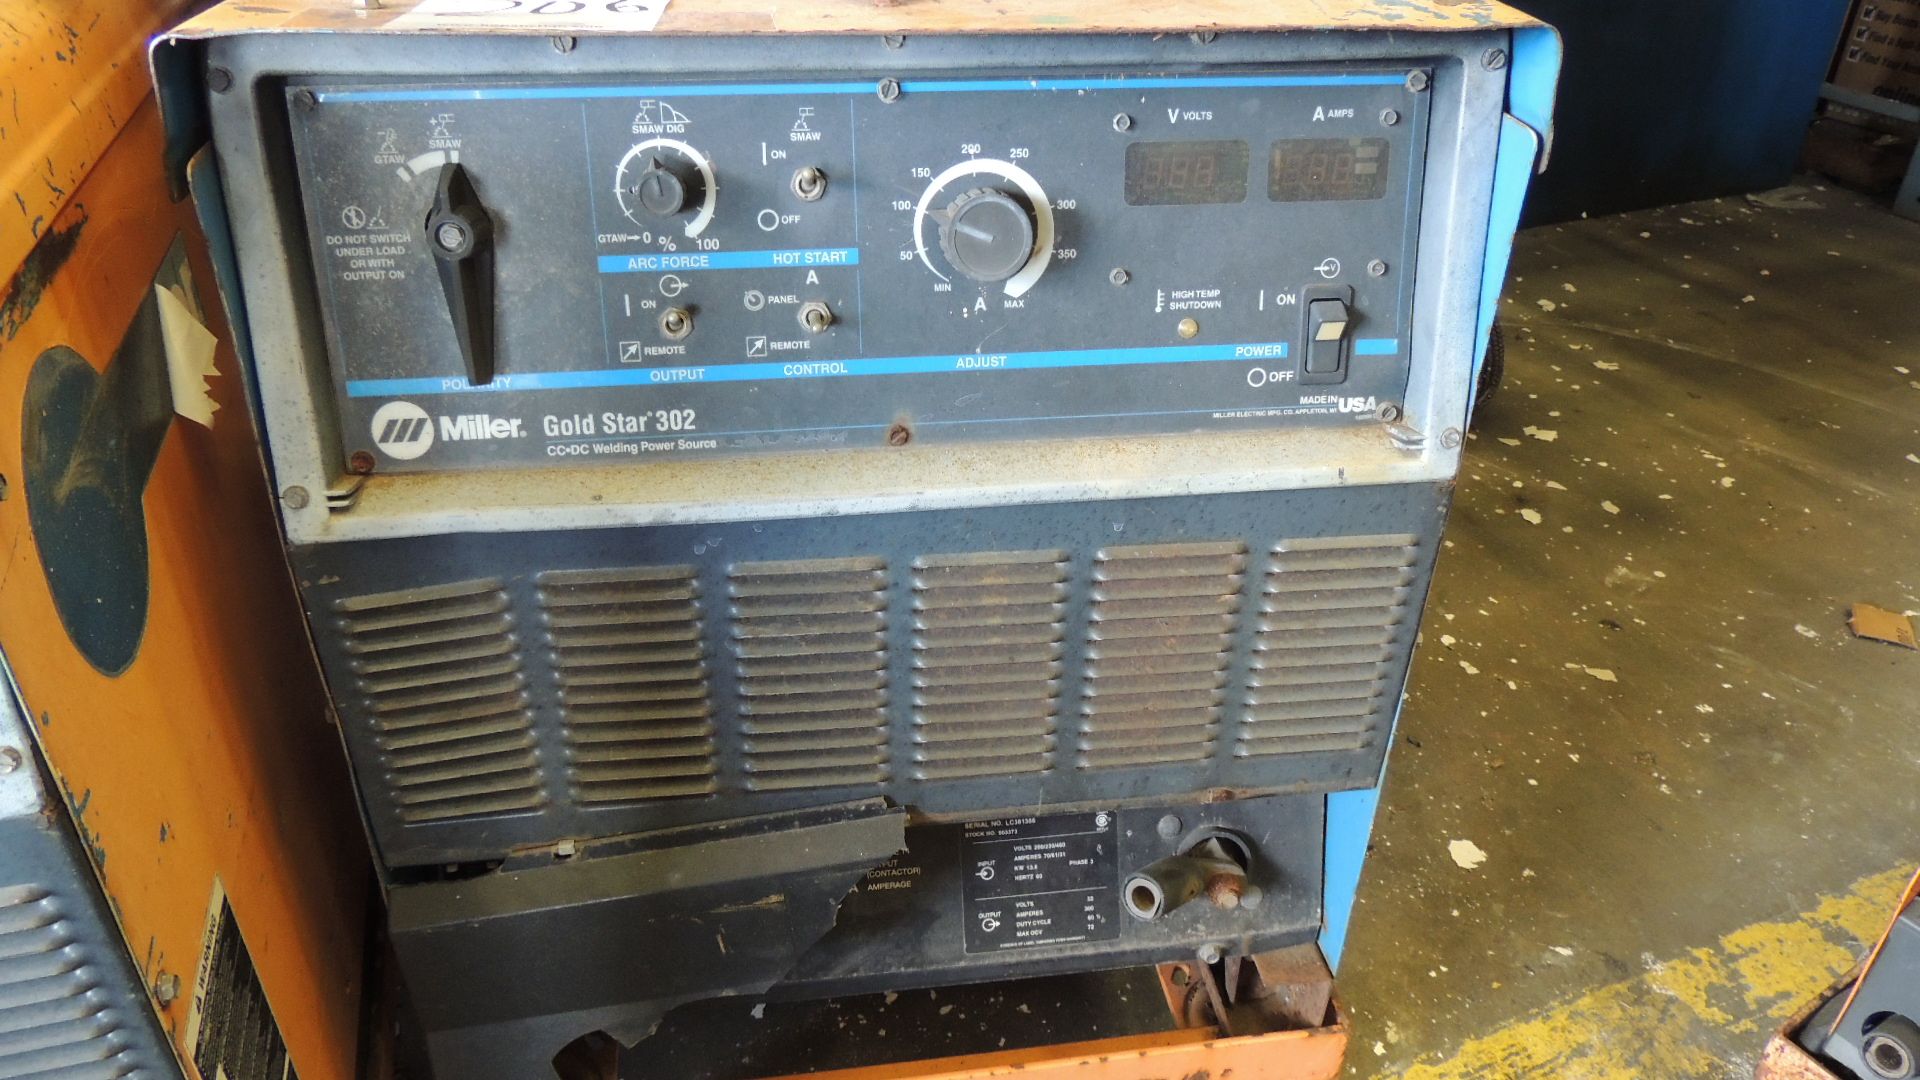 Welder. Miller Gold Star 302 CC.DC welding power source, on casters, volts and amps digital readout, - Image 3 of 5